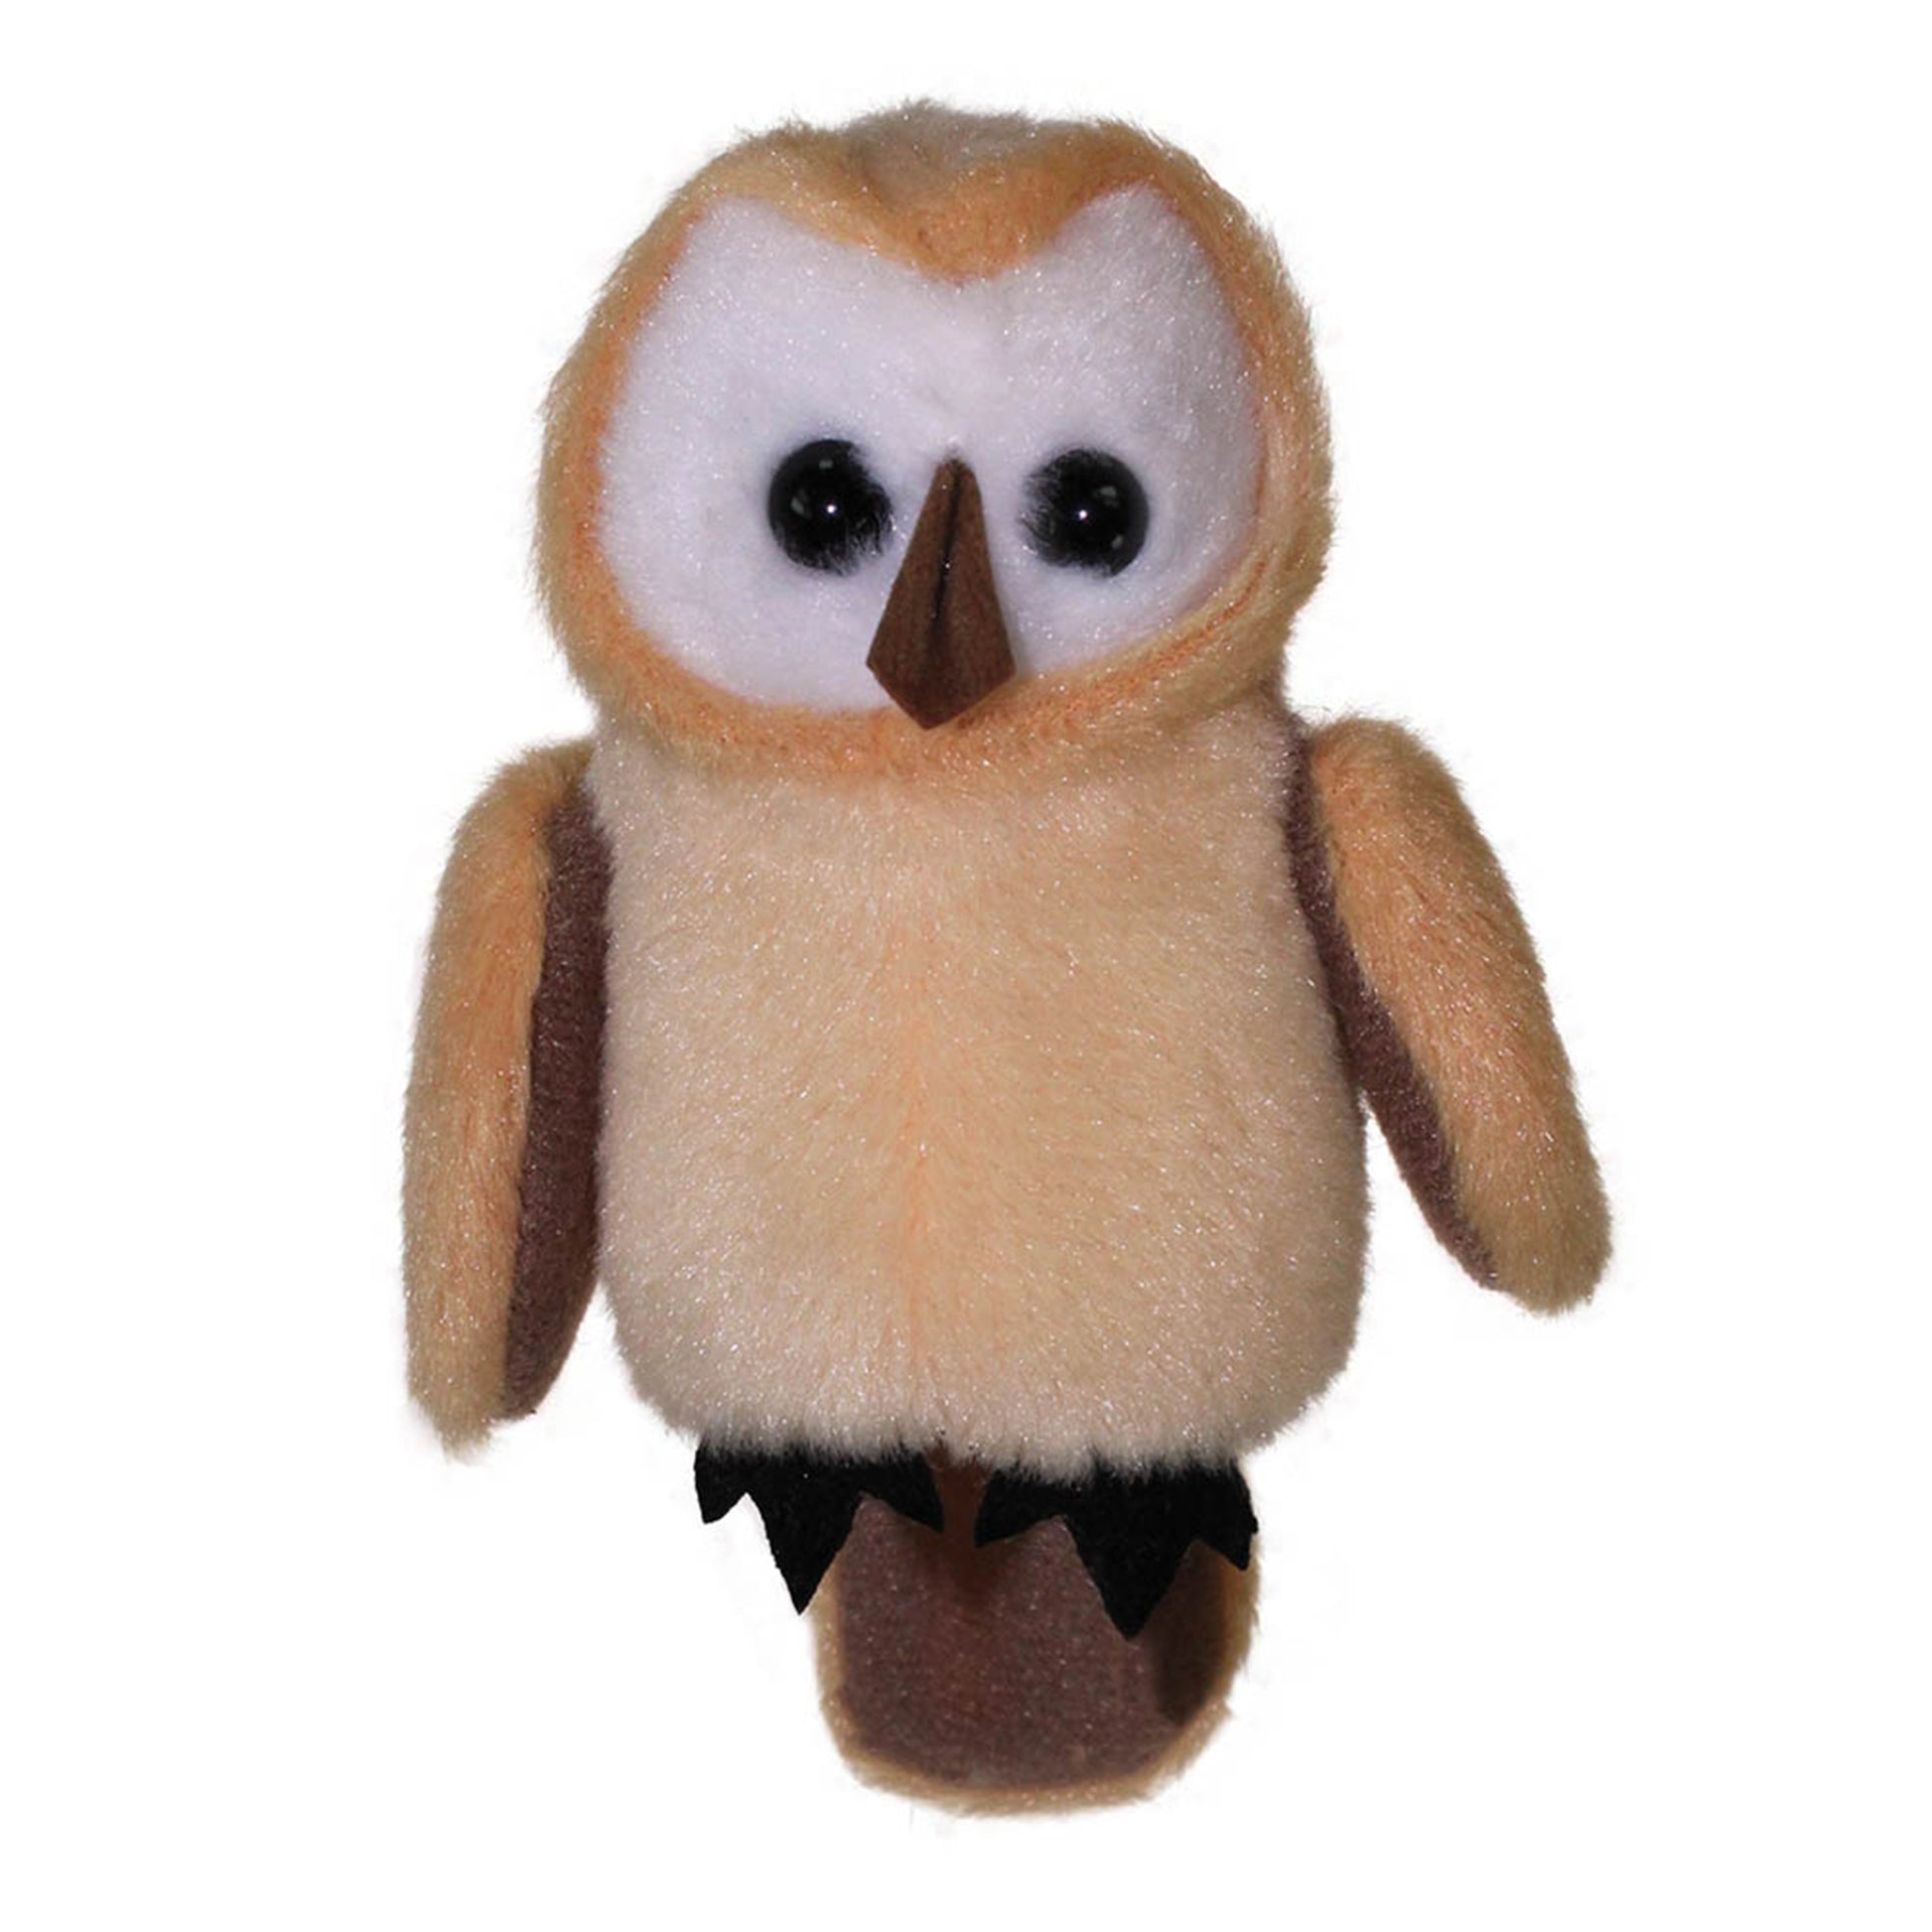 Owl (Barn) Finger Puppet - The Puppet Company - The Forgotten Toy Shop